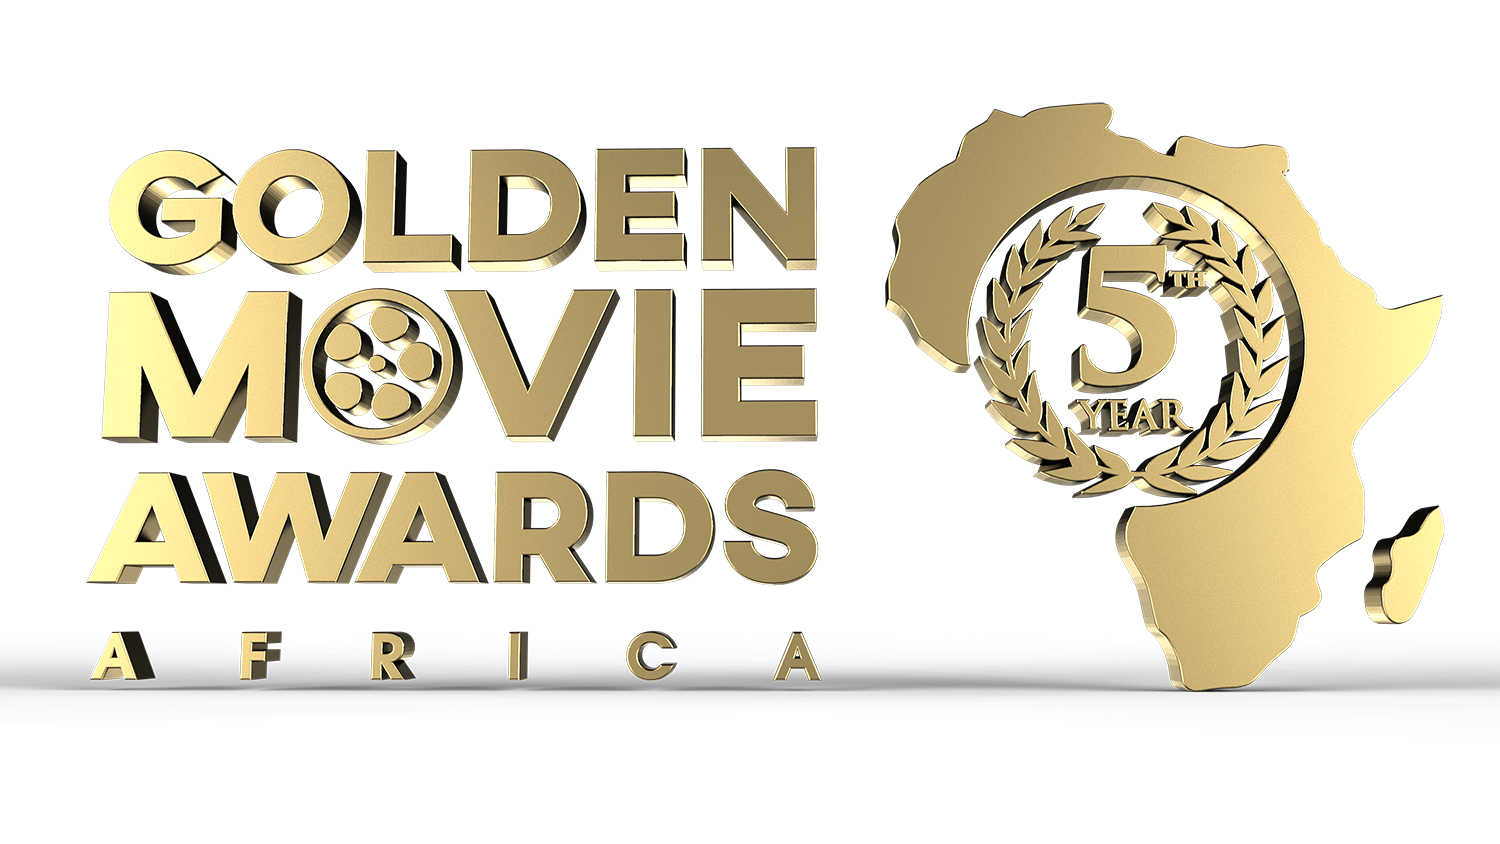 Watch: Full list of Nominees for Golden Movie Awards 2019 announced